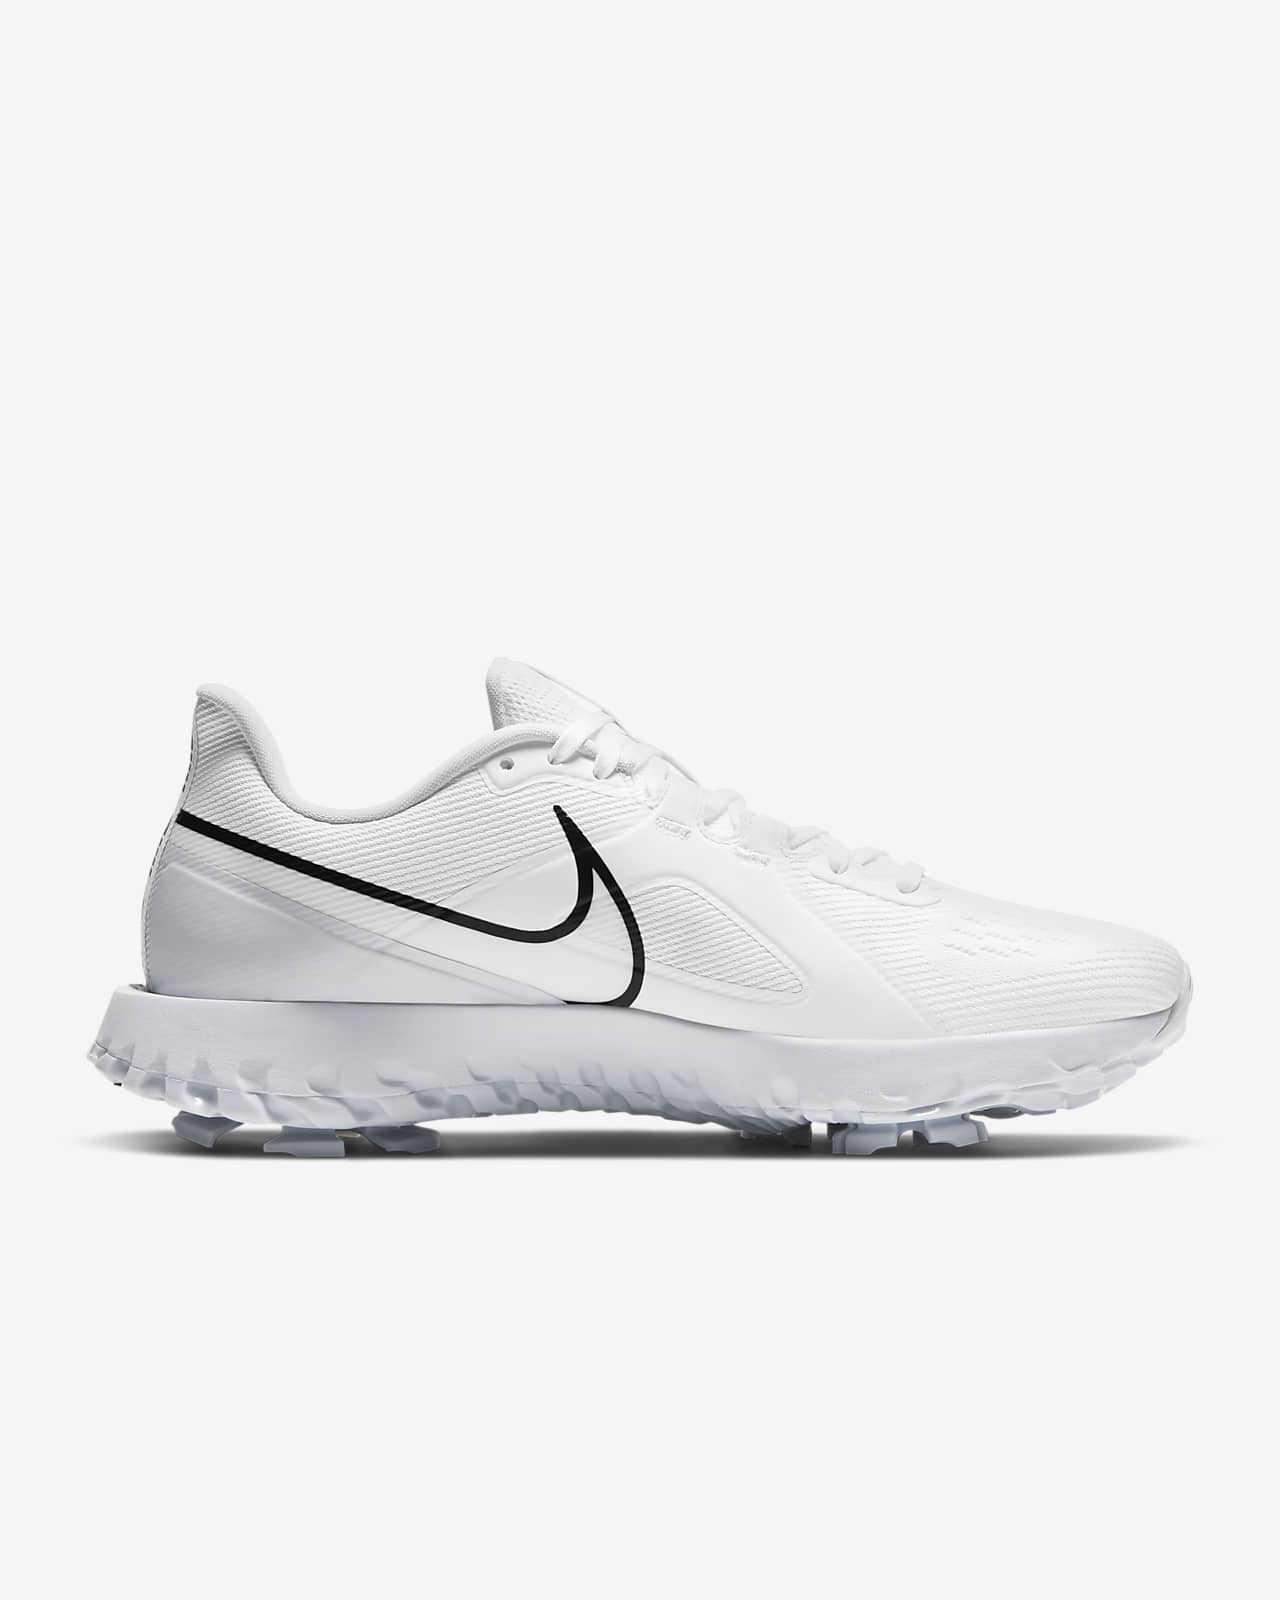 nike react infinity pro golf review